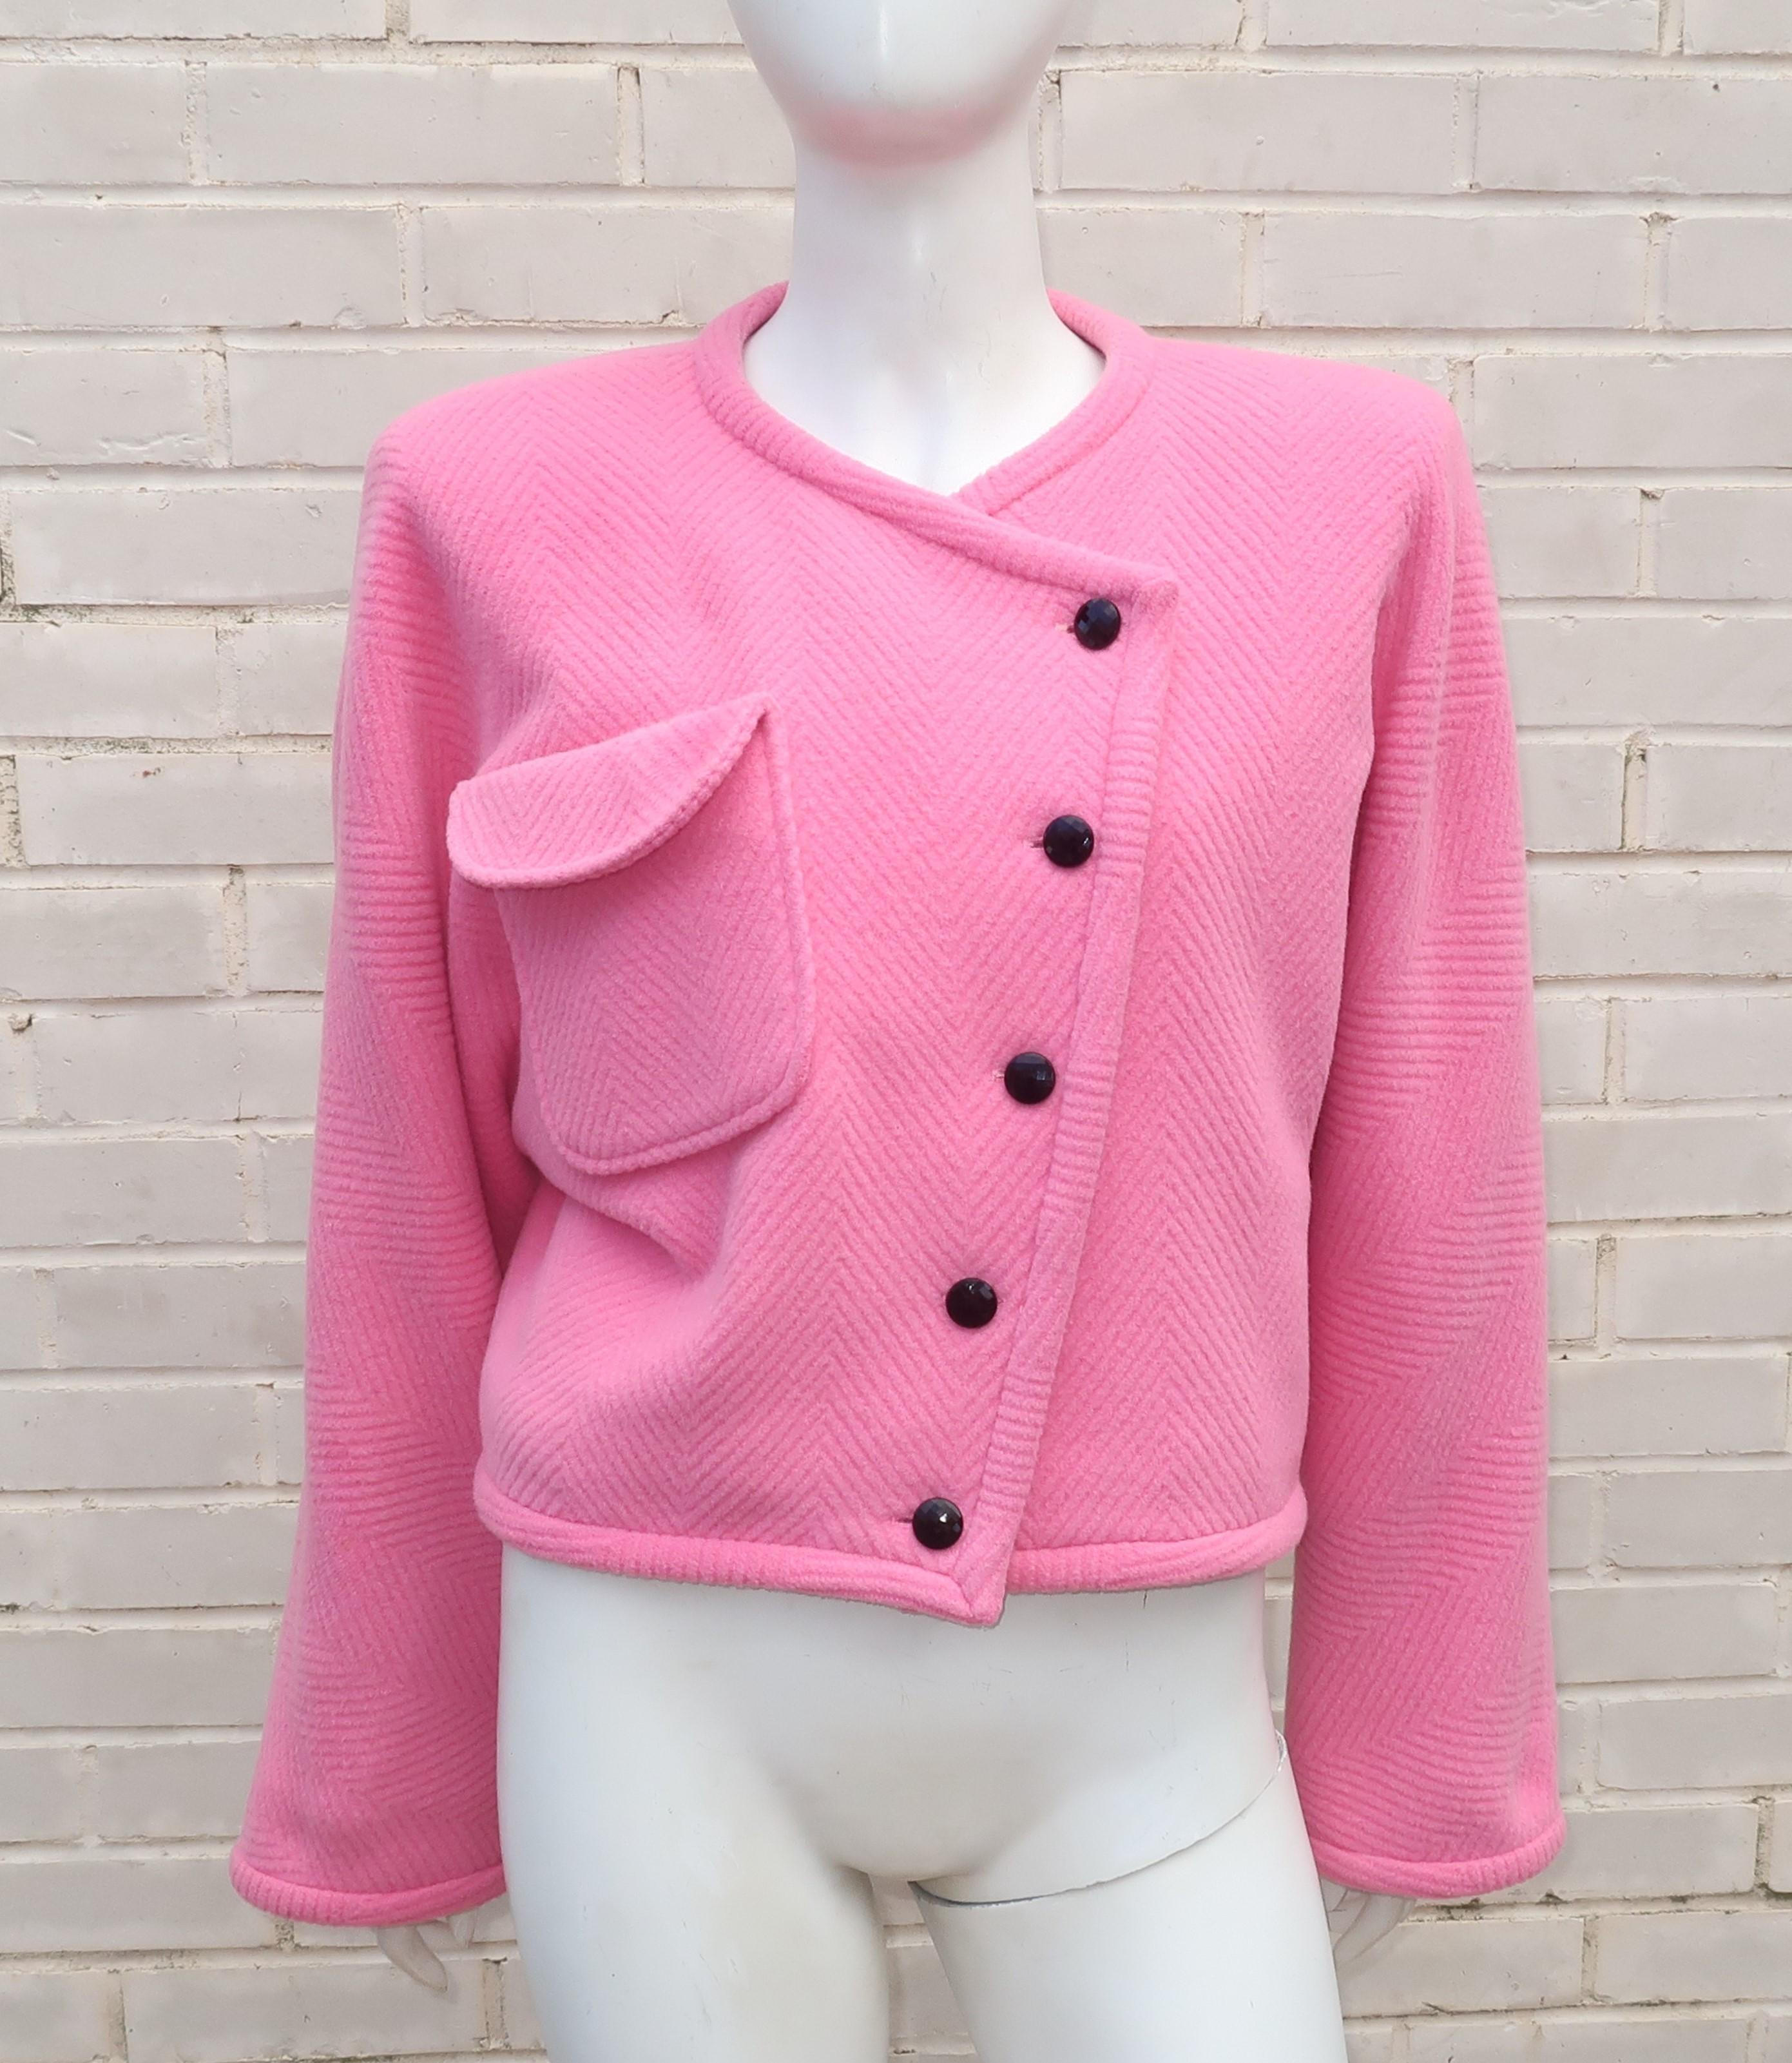 1980's Emanuel Ungaro cropped jacket in a cozy pink wool with a herringbone pattern.  The collarless jacket has an asymmetrical black button front with one large breast pocket.  It offers a boxy silhouette with full sleeves and a classic 1980's